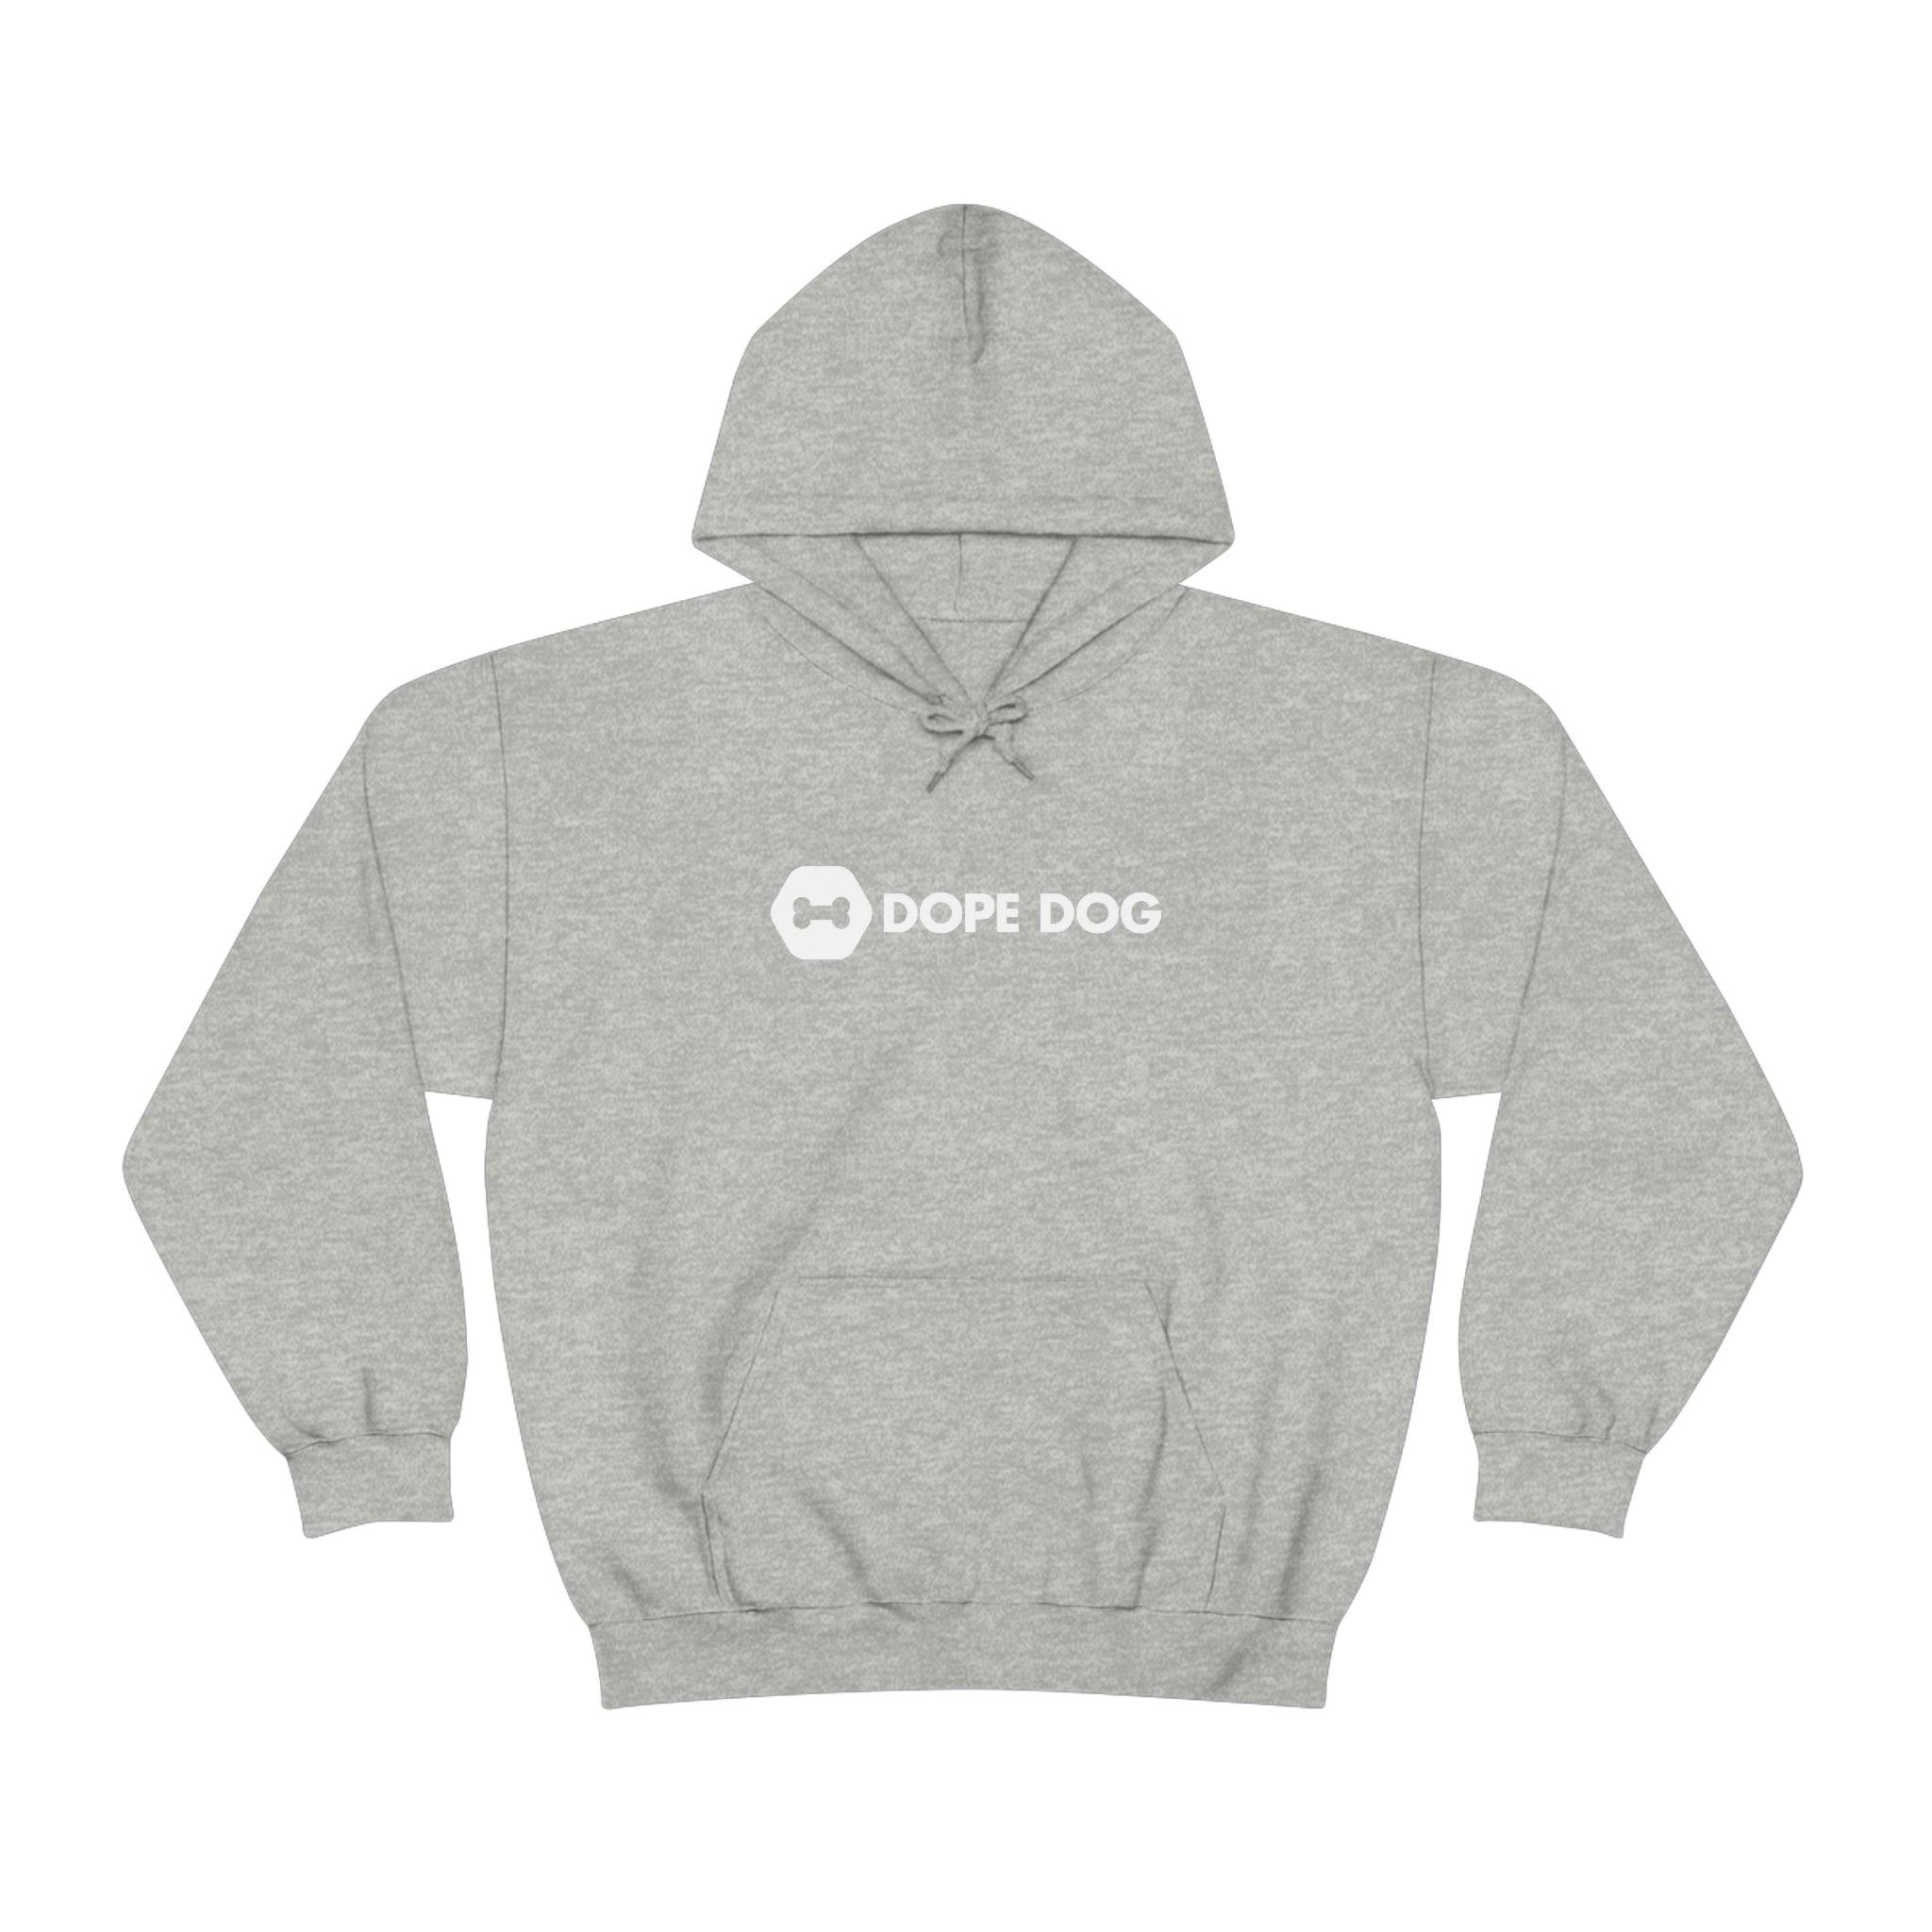 Dope Dog Official Pack Hoodie - Dope Dog 